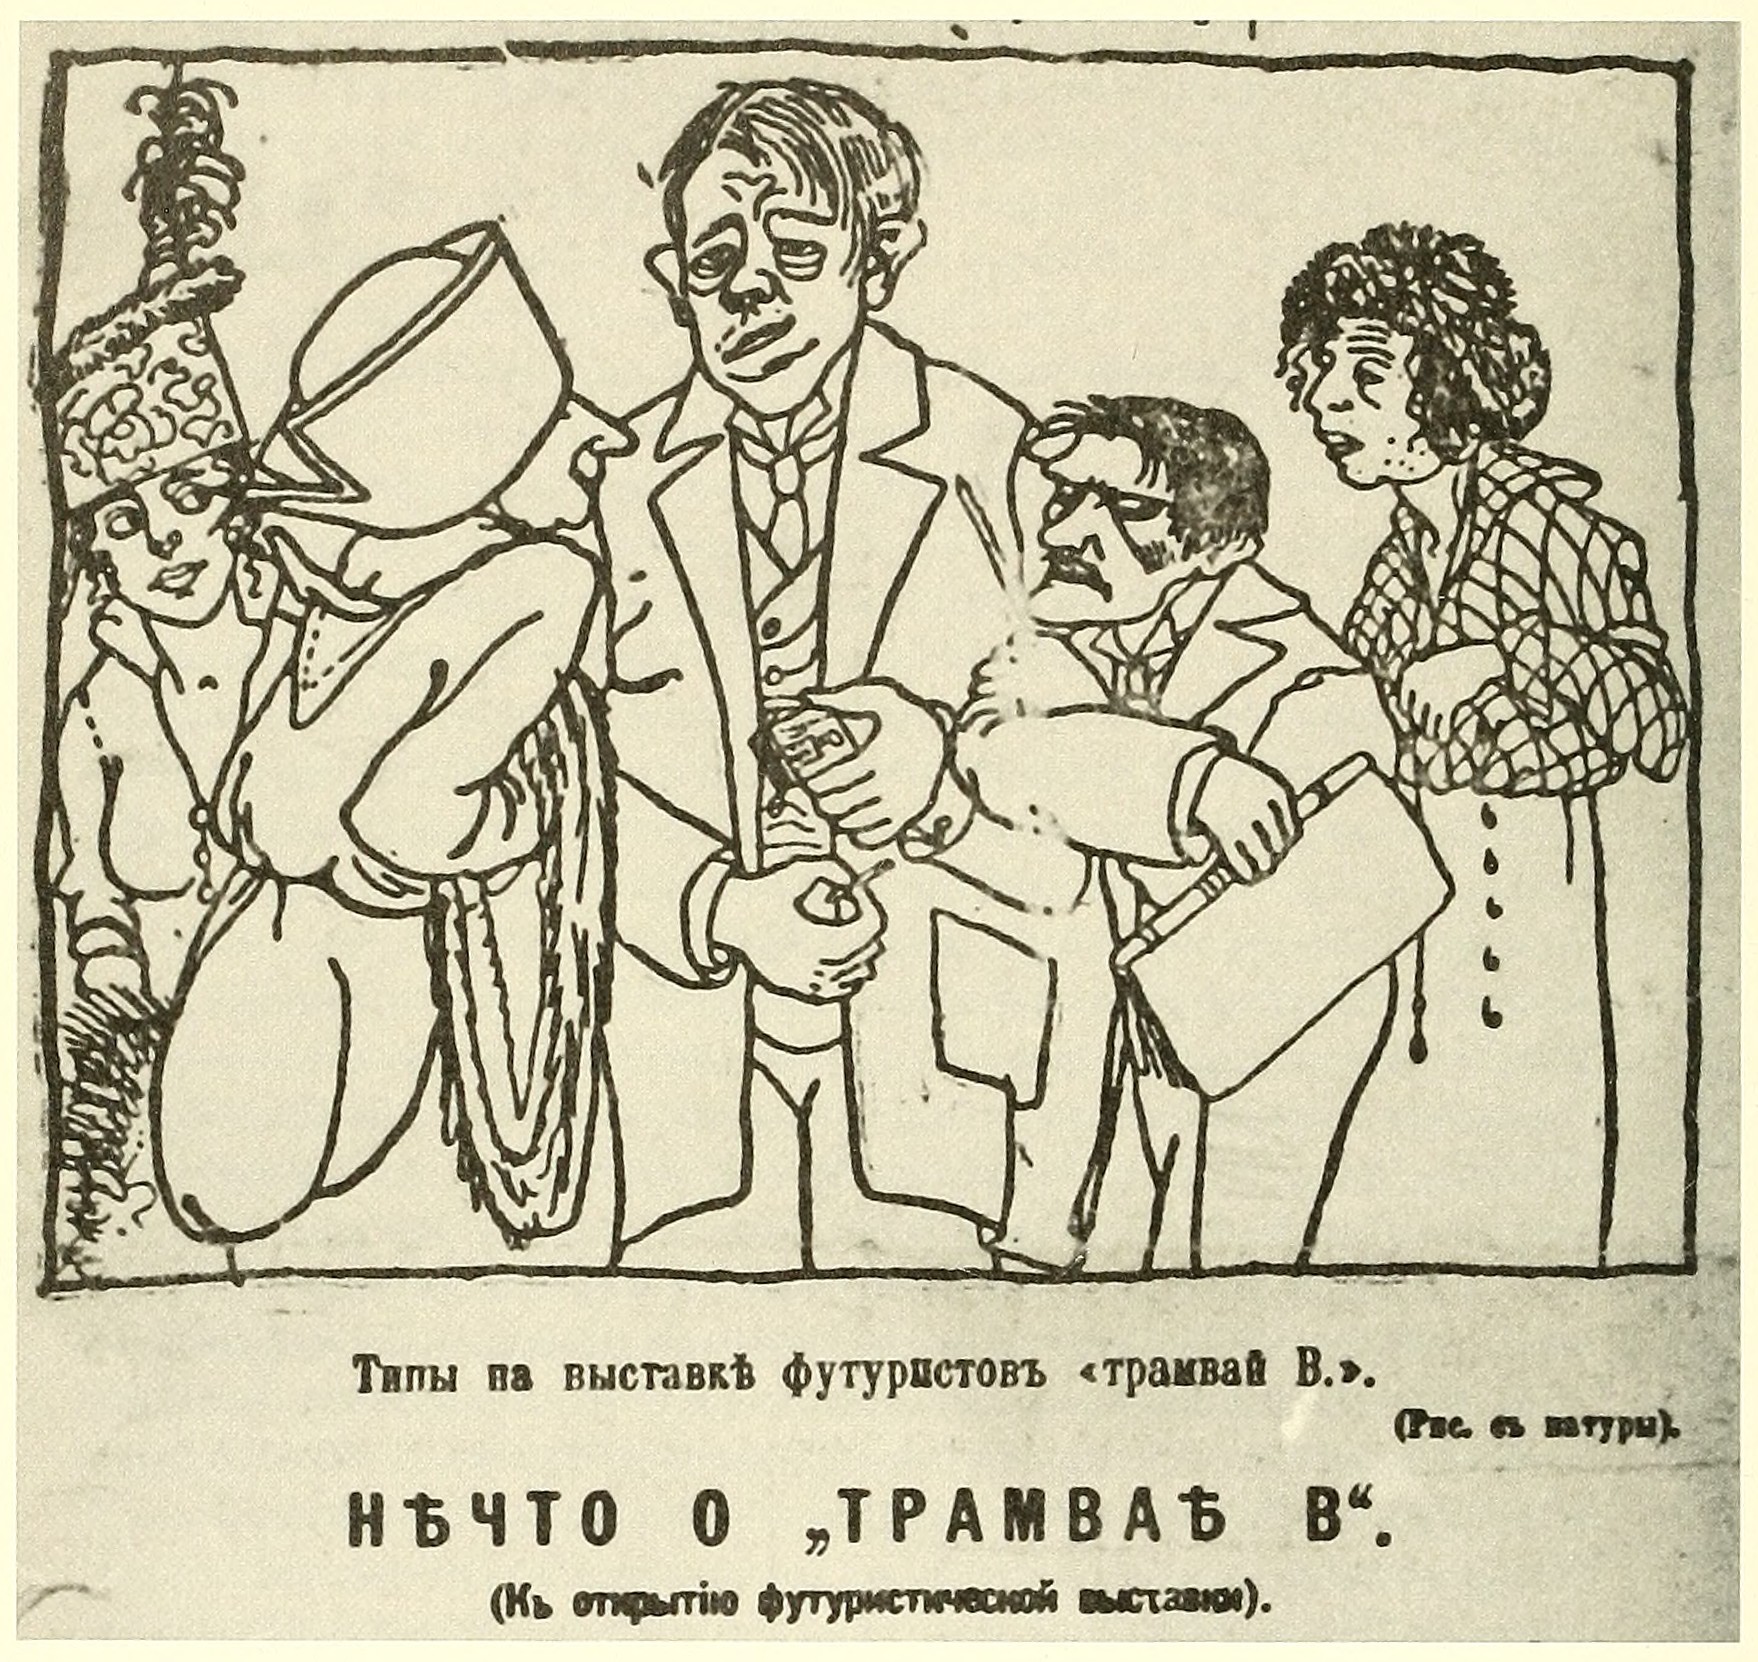 Types at the "Tramway V" Exhibition of Futurists, caricature published in the newspaper Golos Rusi (Petrograd), 1915. The drawing shows (left to right) Ksenia Boguslavskaia, Alexandra Exter, Vladimir Tatlin, Ivan Puni, and Olga Rozanova at the Tramway V exhibition. Courtesy of Puni-Archiv, Zurich.